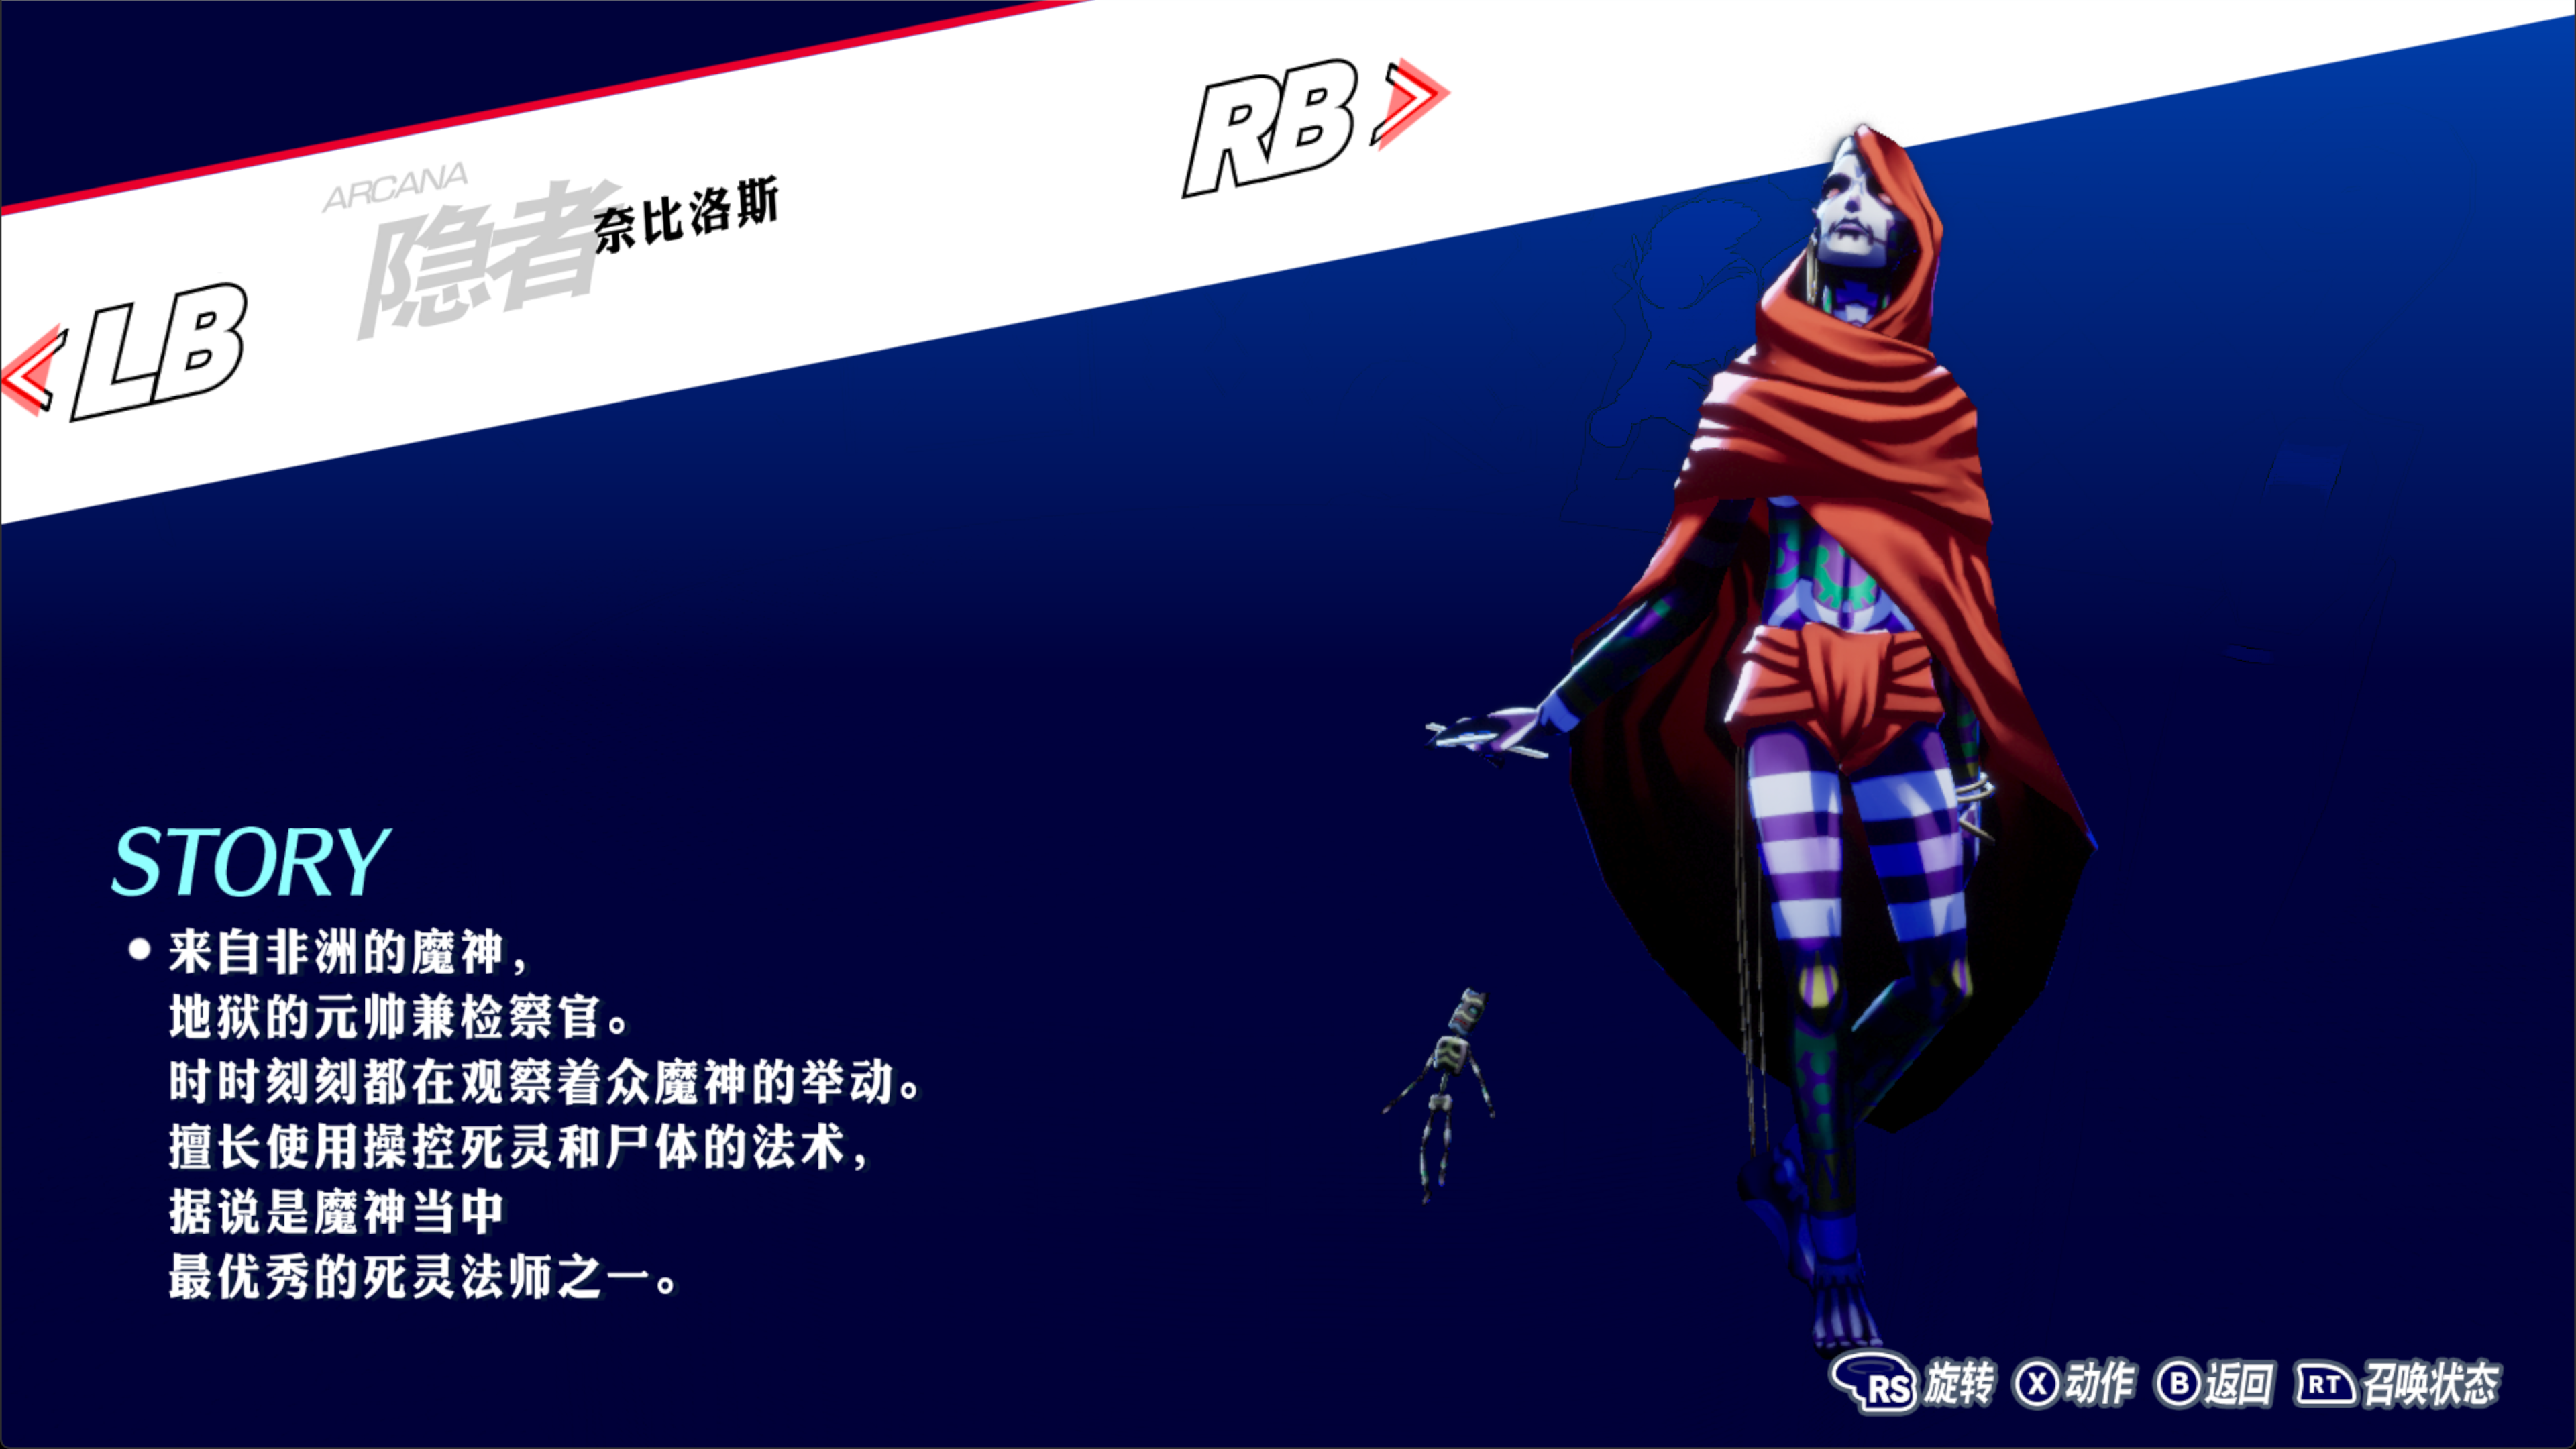 P3R 奈比洛斯图鉴.png